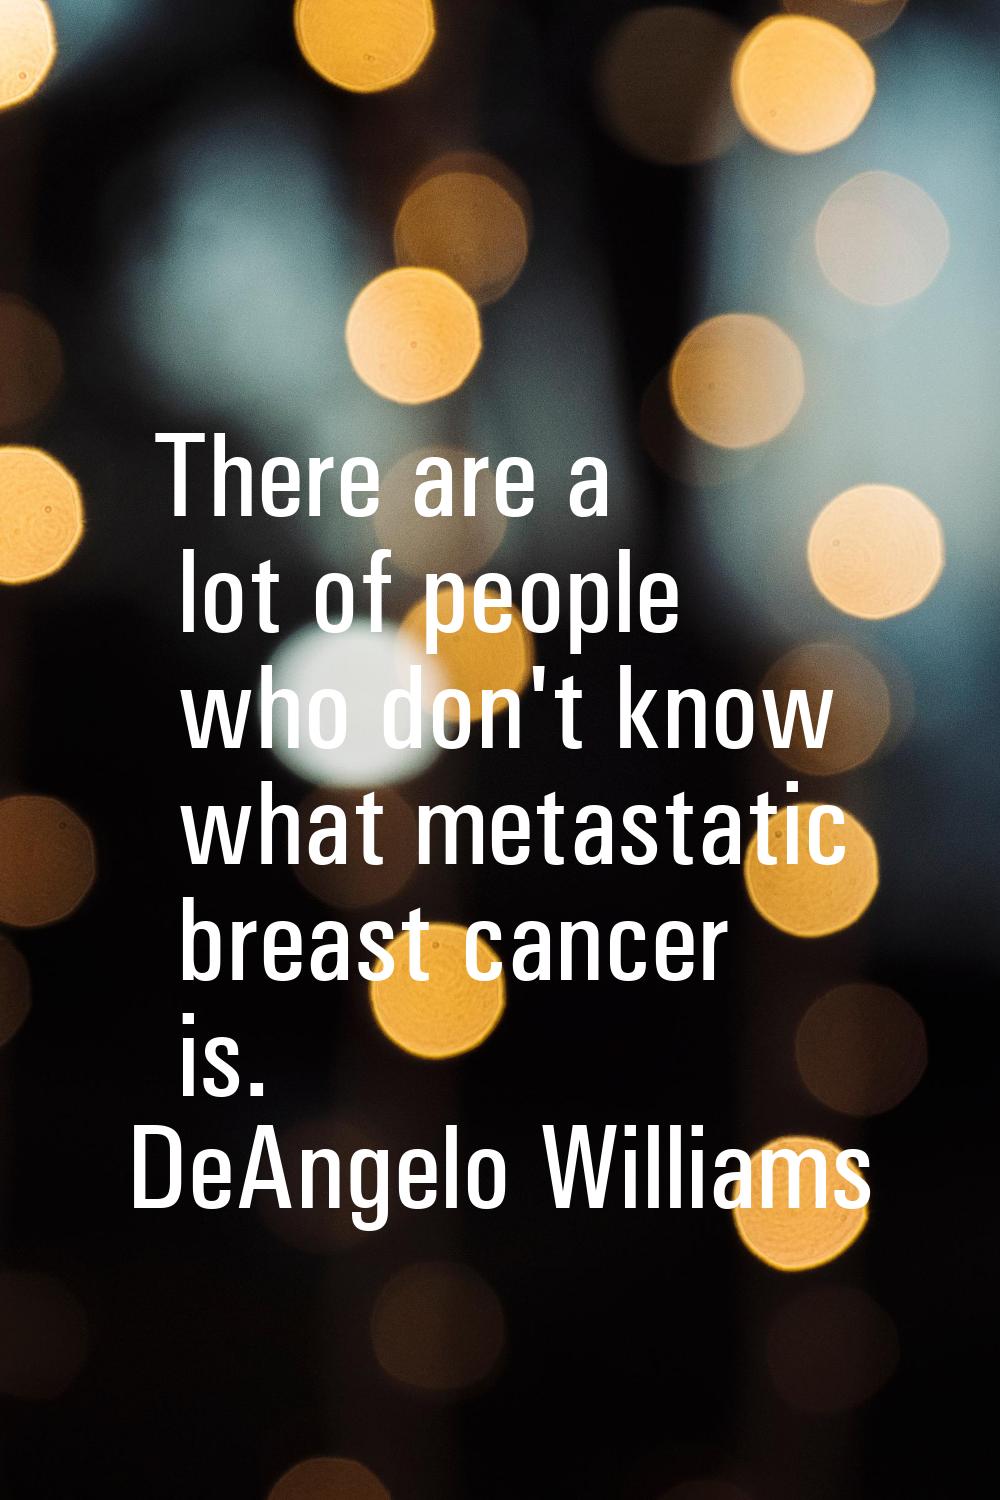 There are a lot of people who don't know what metastatic breast cancer is.